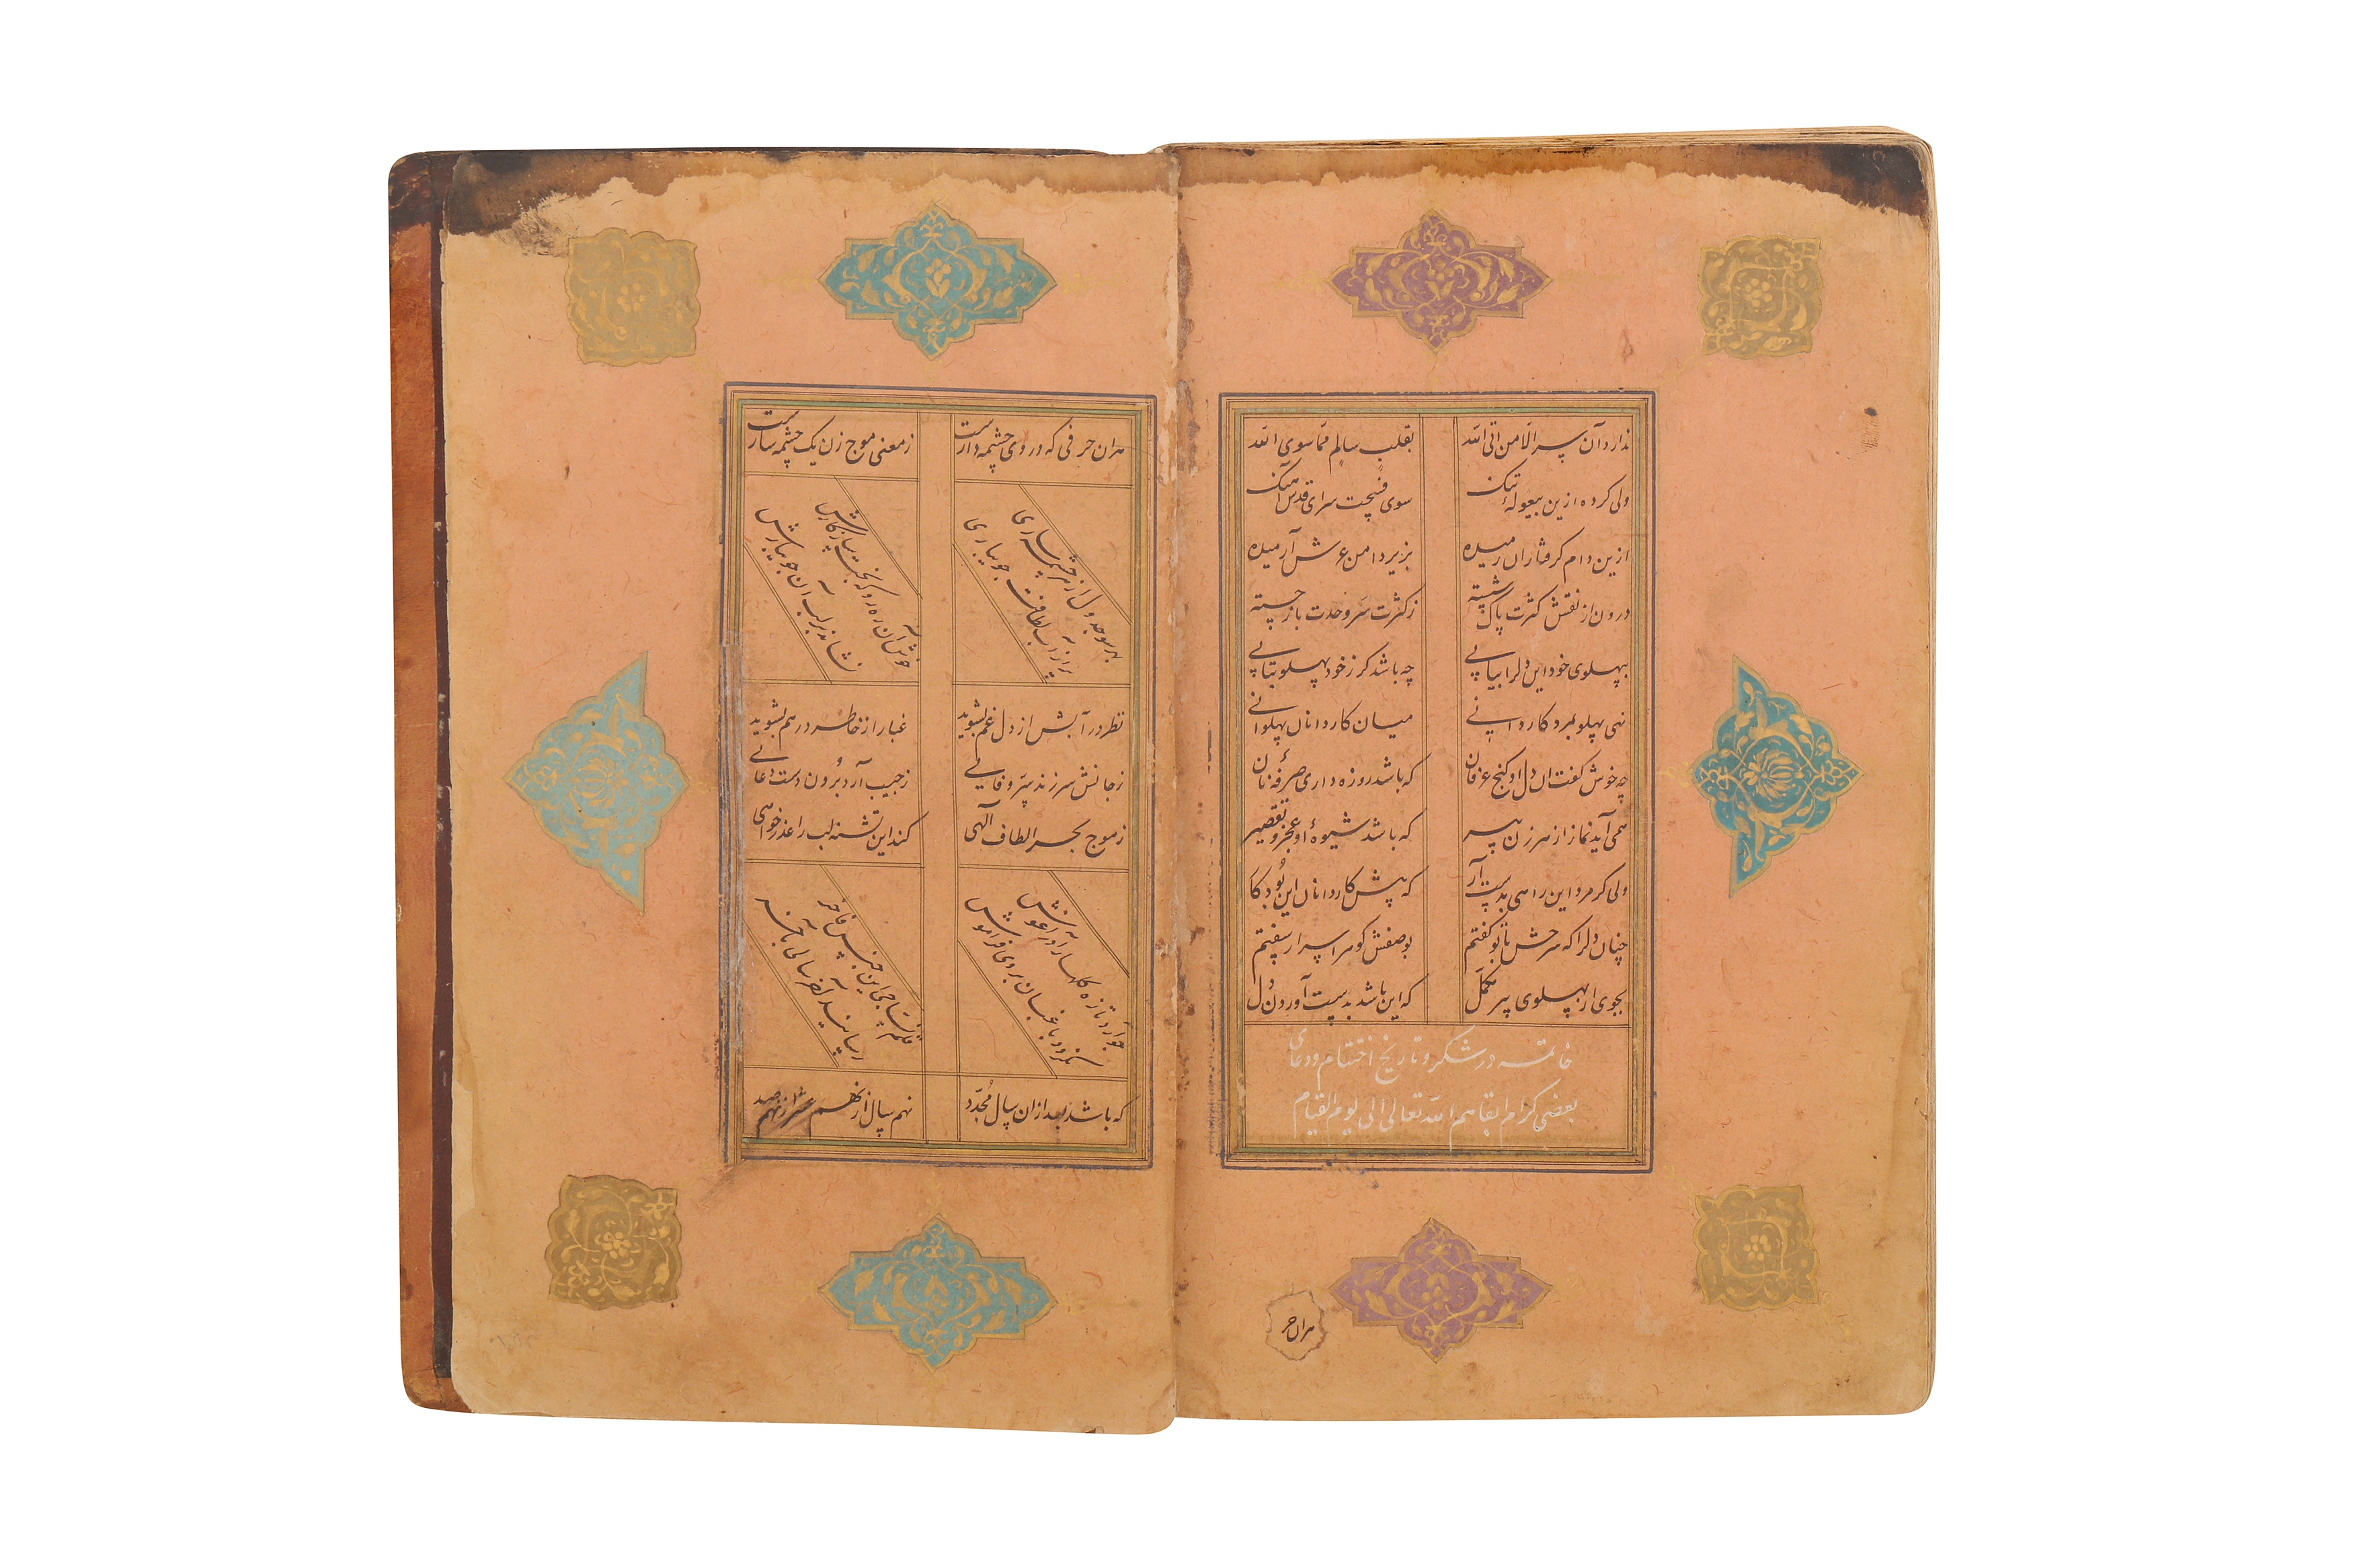 A LATE 16TH/EARLY 17TH CENTURY PERSIAN POETIC MANUSCRIPT - YOUSUF AND ZULAIKA, HAFT AWRANG OF JAMI - Image 6 of 6